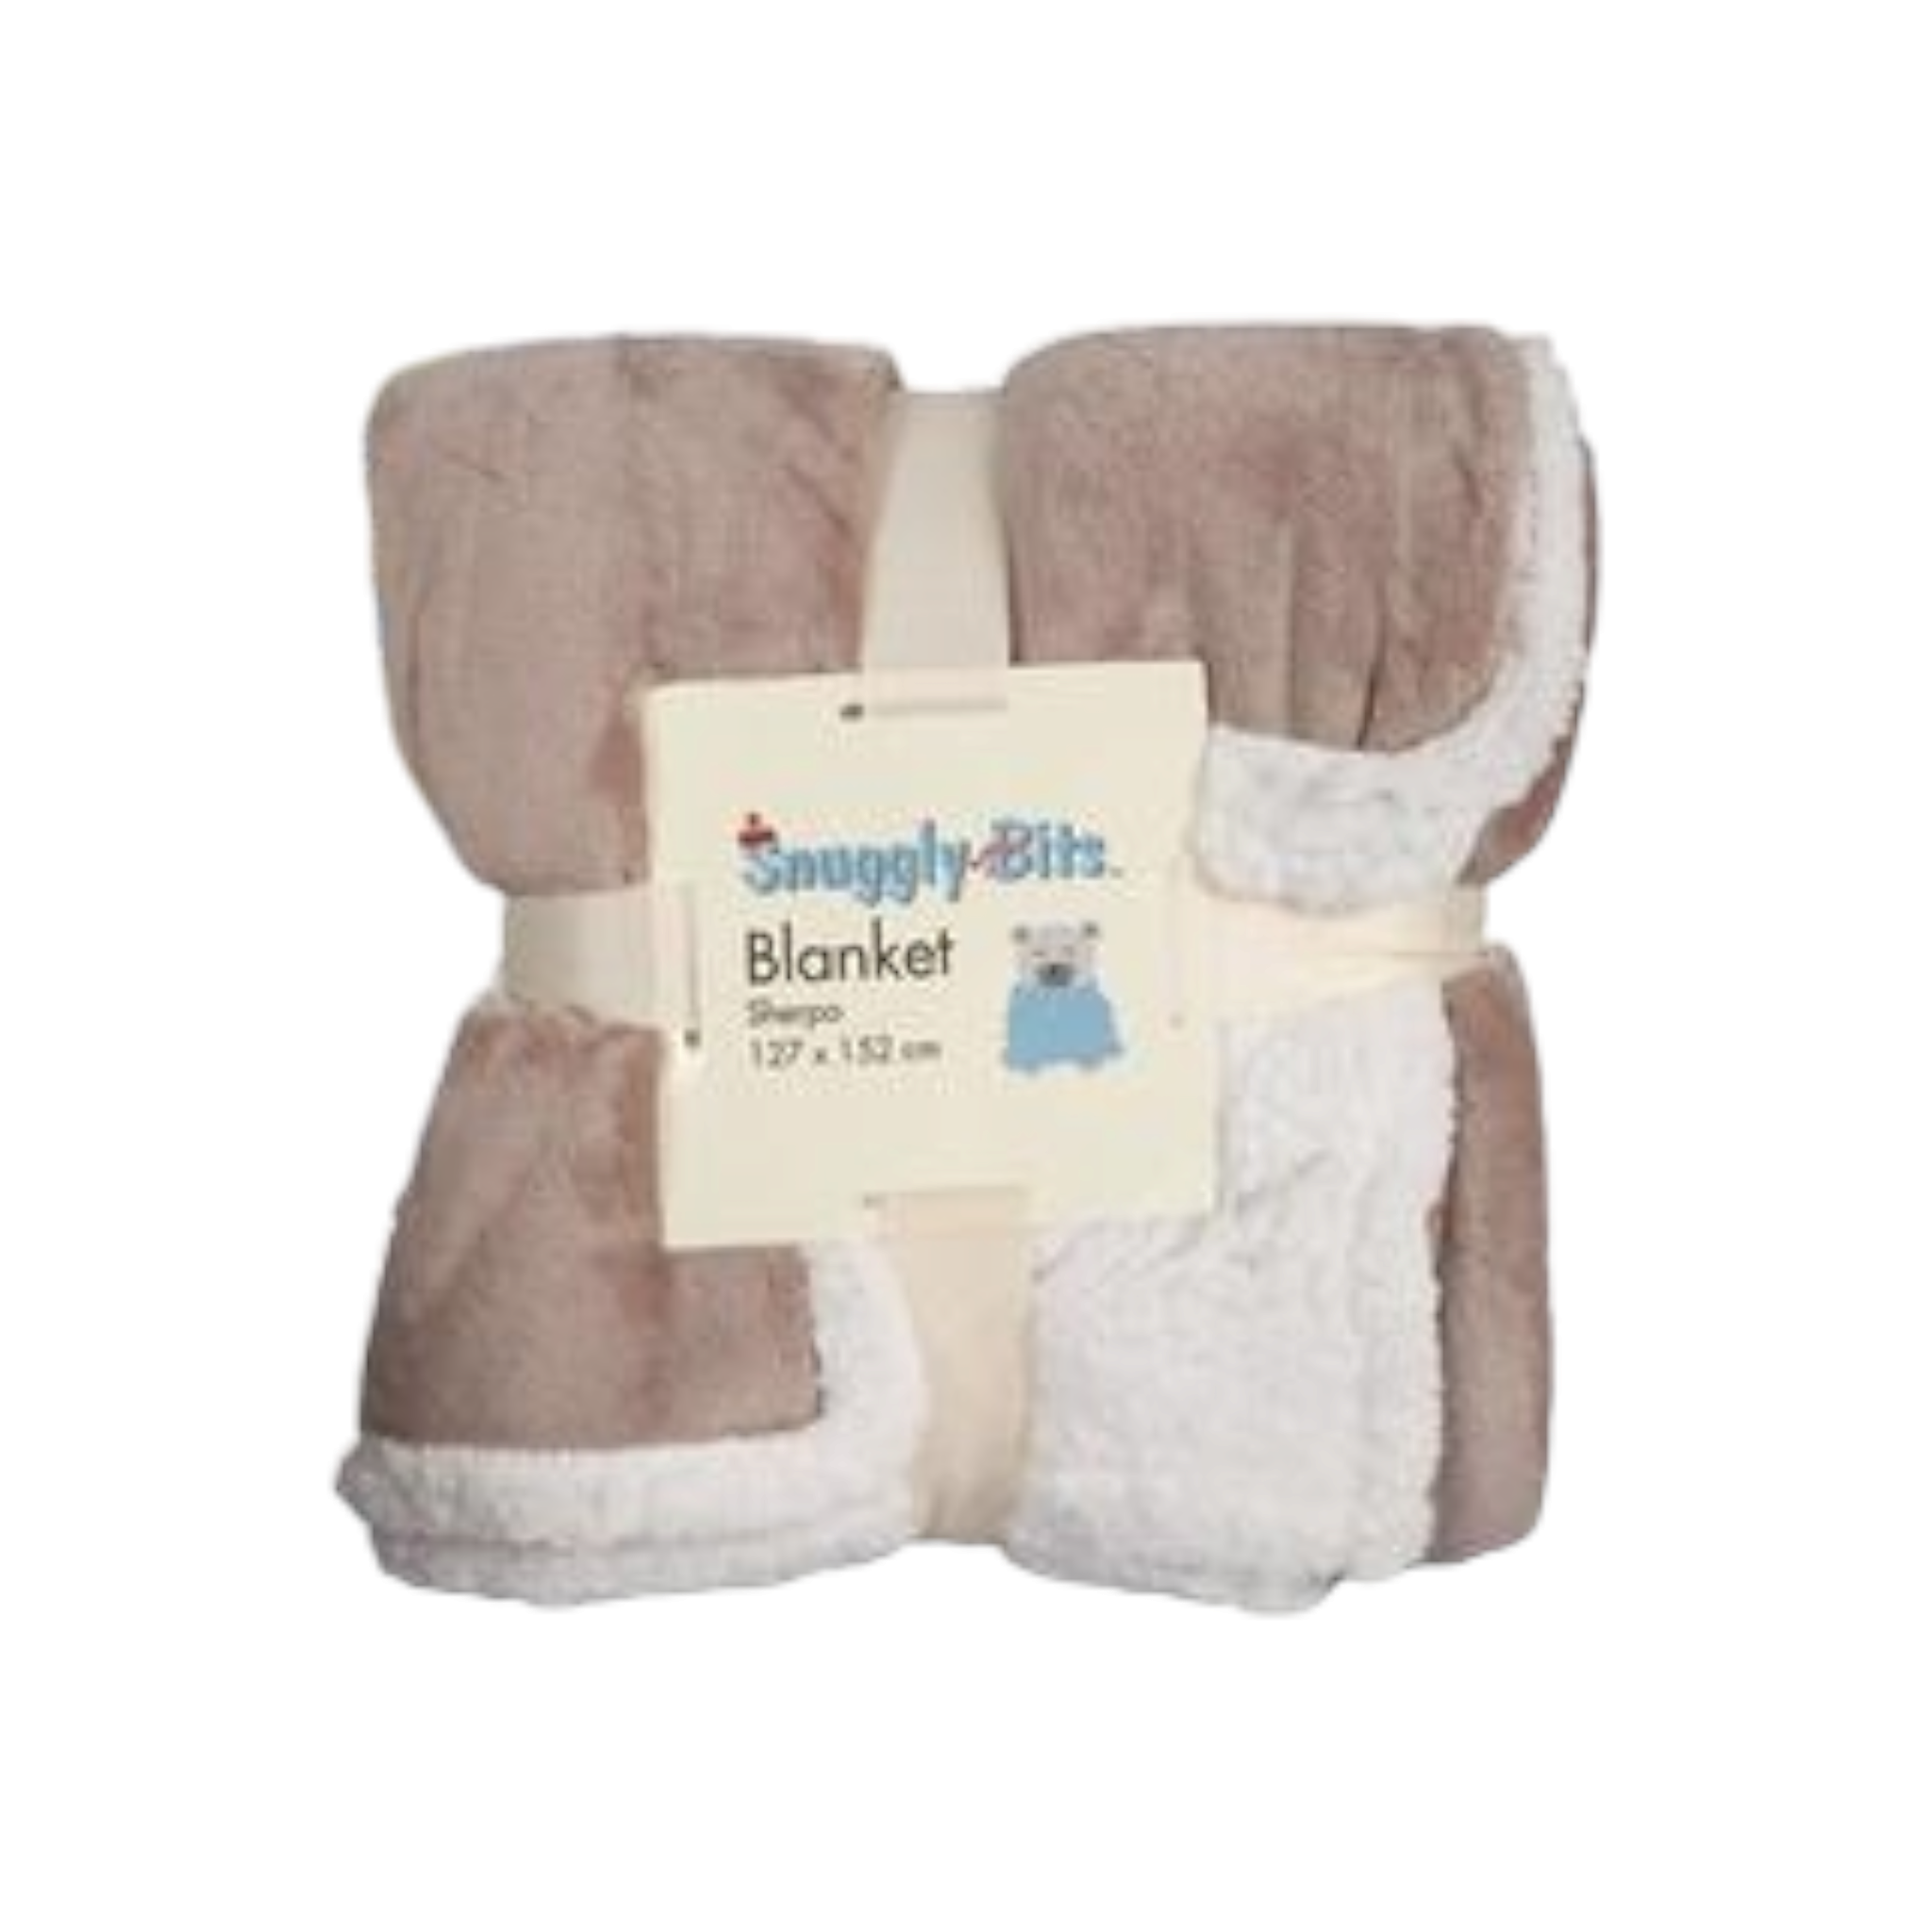 Blanket Flannel with Sherpa 127x152cm Assorted